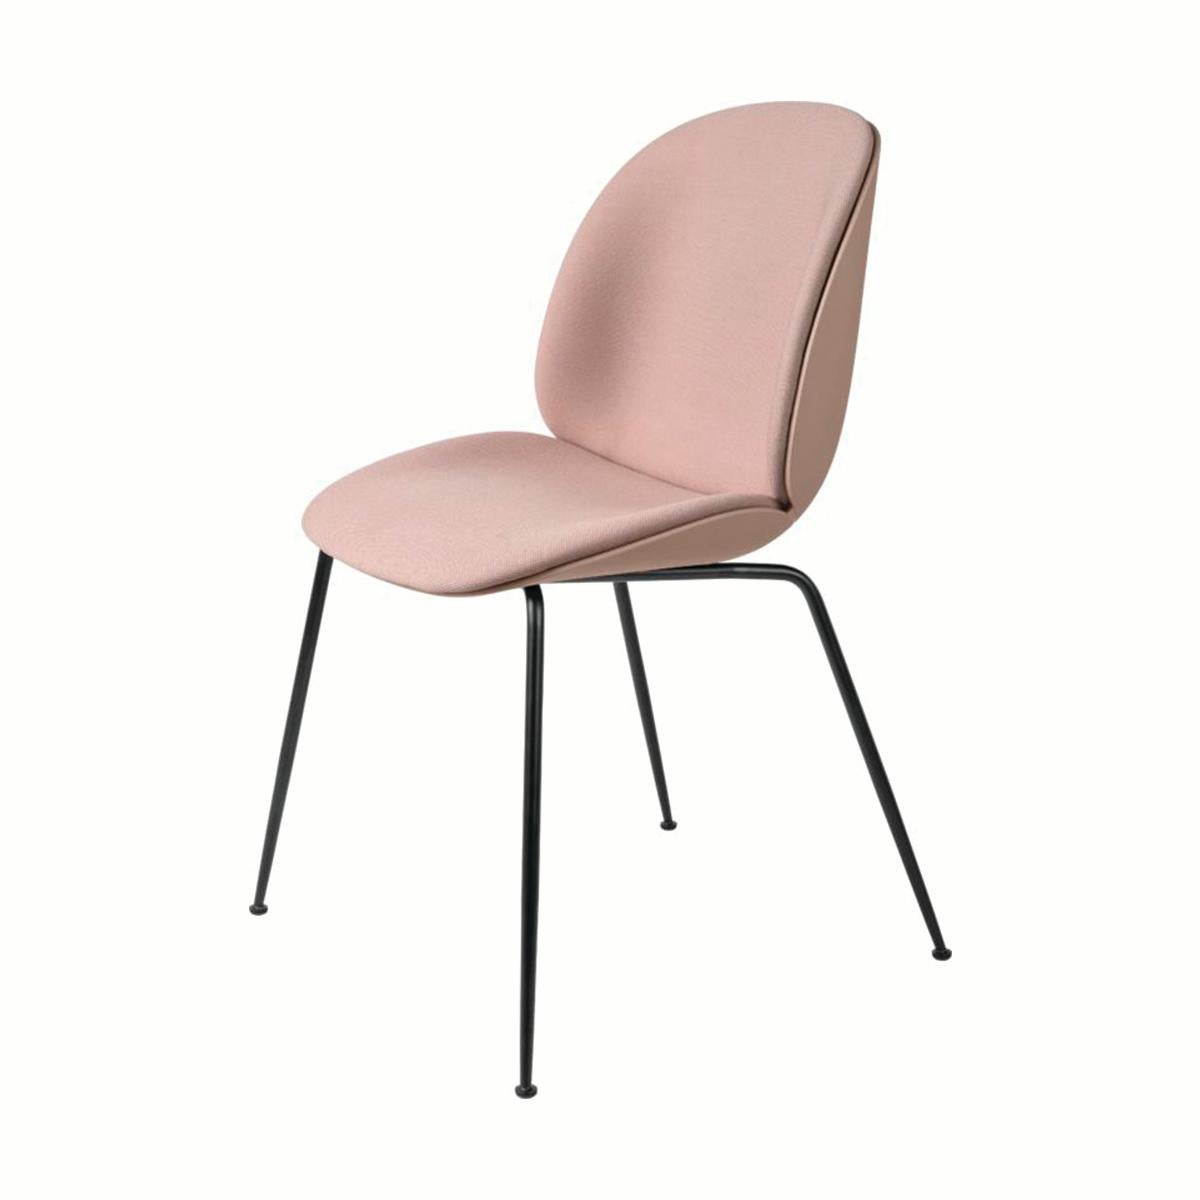 The Beetle chair collection is a chair series in laminated molded veneer with seat and back in 2 separate parts. The 2 parts are joined together with a steel fitting milled into the 2 shells. The shells are 10 mm thick. This version of the chair is